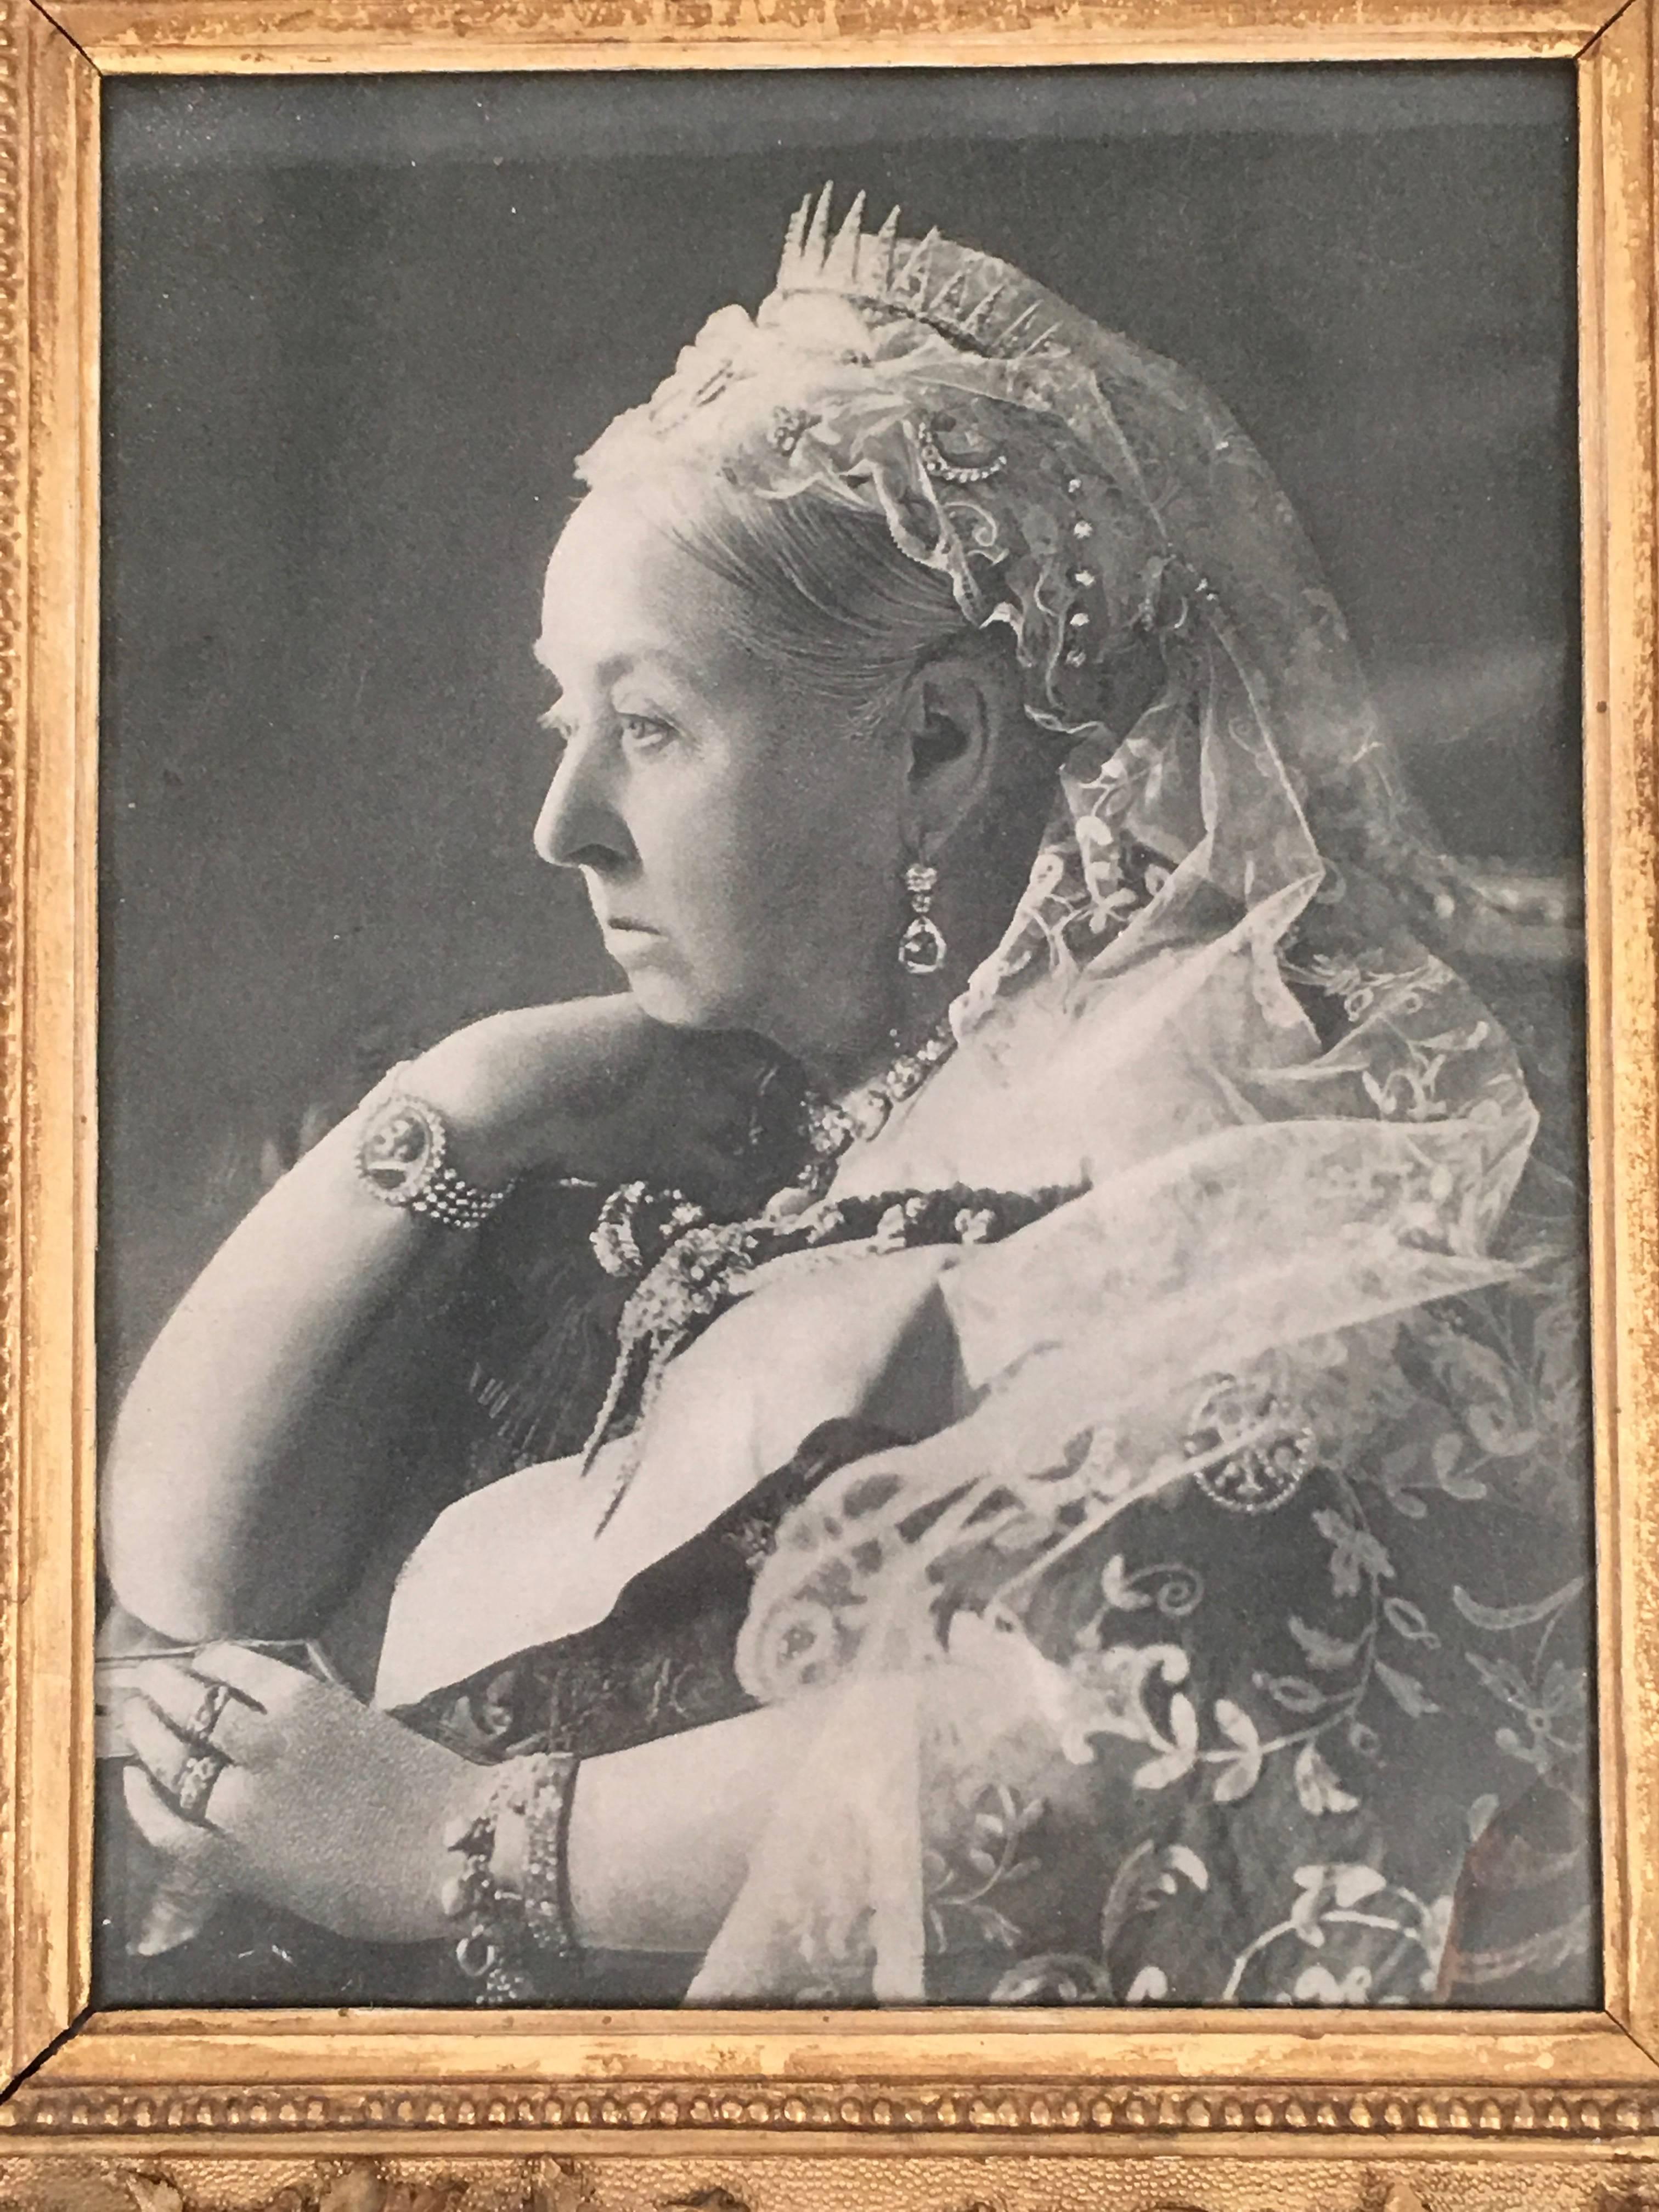 A diamond jubilee photogravure portrait of Queen Victoria (1819-1901), made on the occasion of her 60th anniversary on the throne in 1897. She is depicted with her chin resting on her hand, a pose which highlights her bracelet which features a